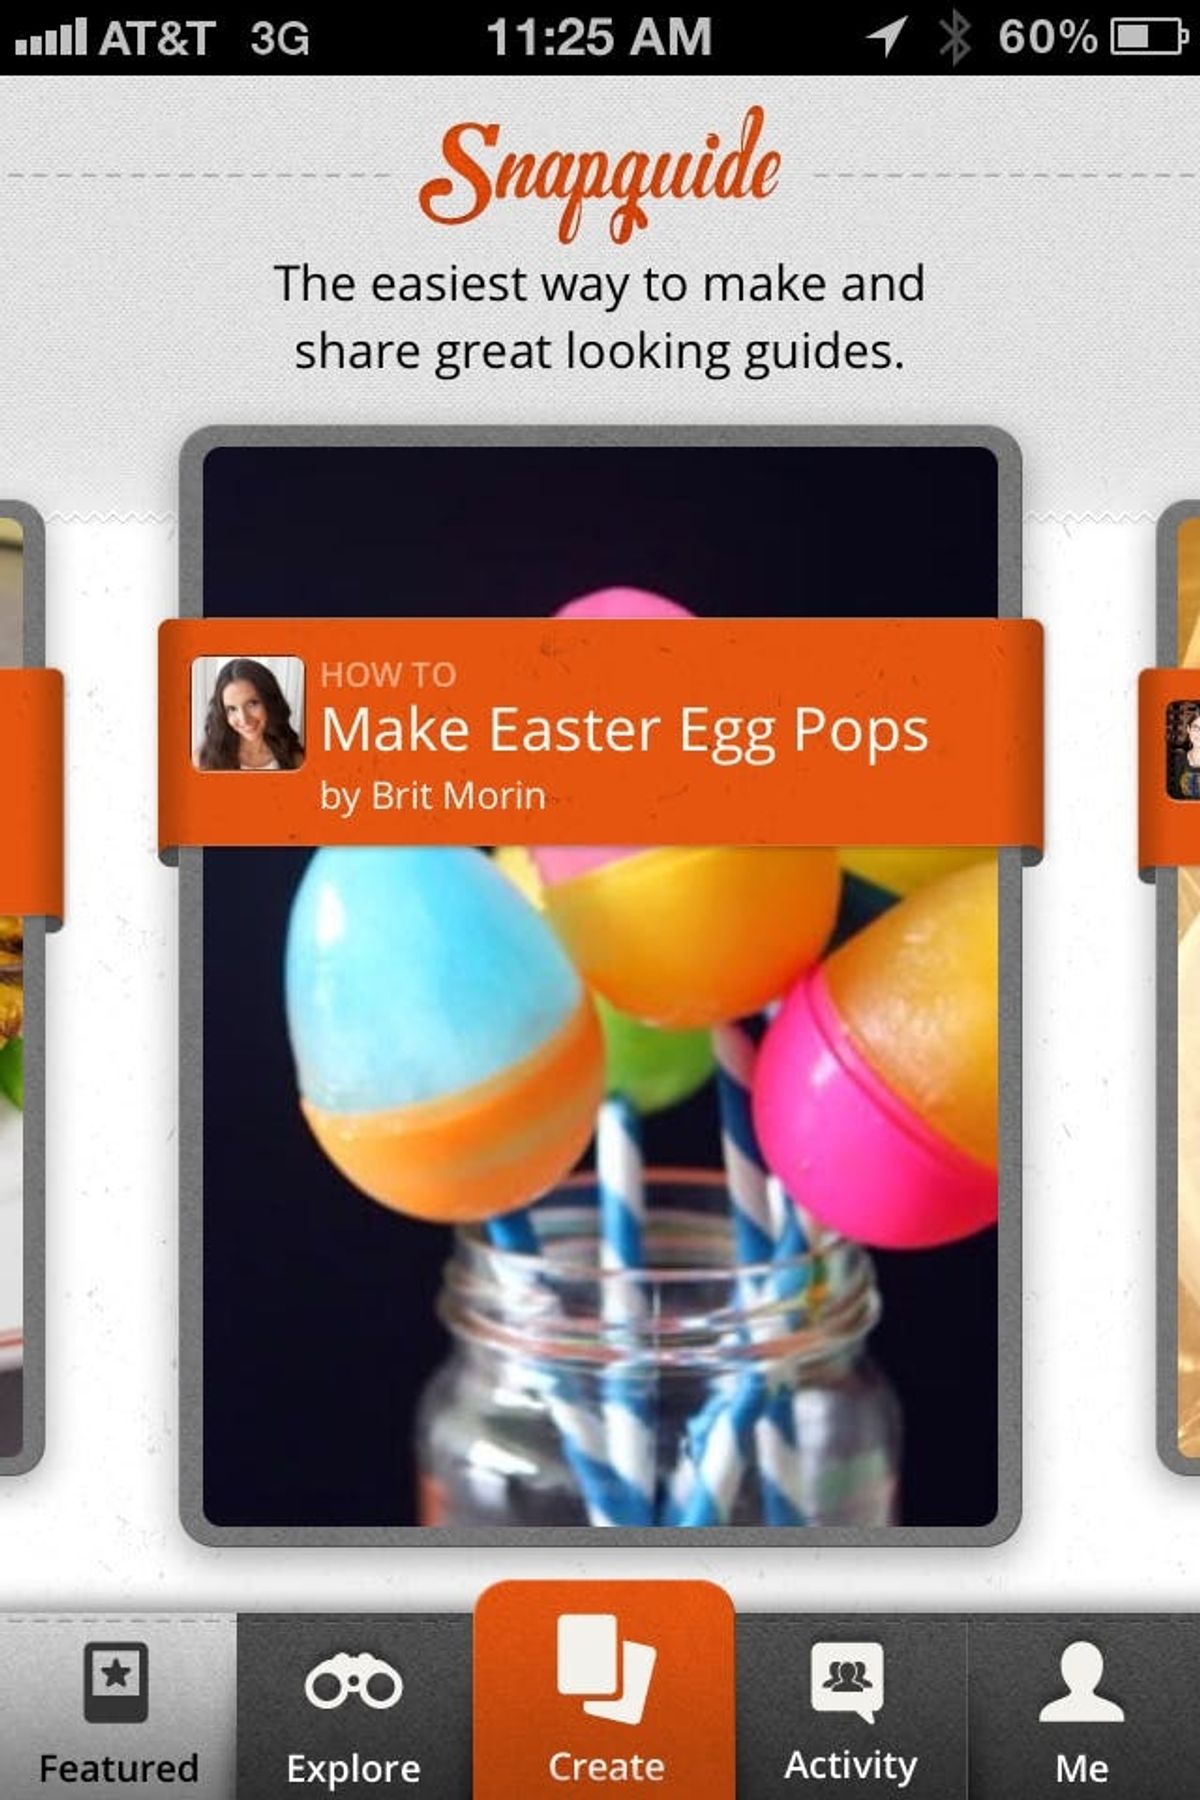 Oh Snap! Snapguide is the Ultimate How-To App